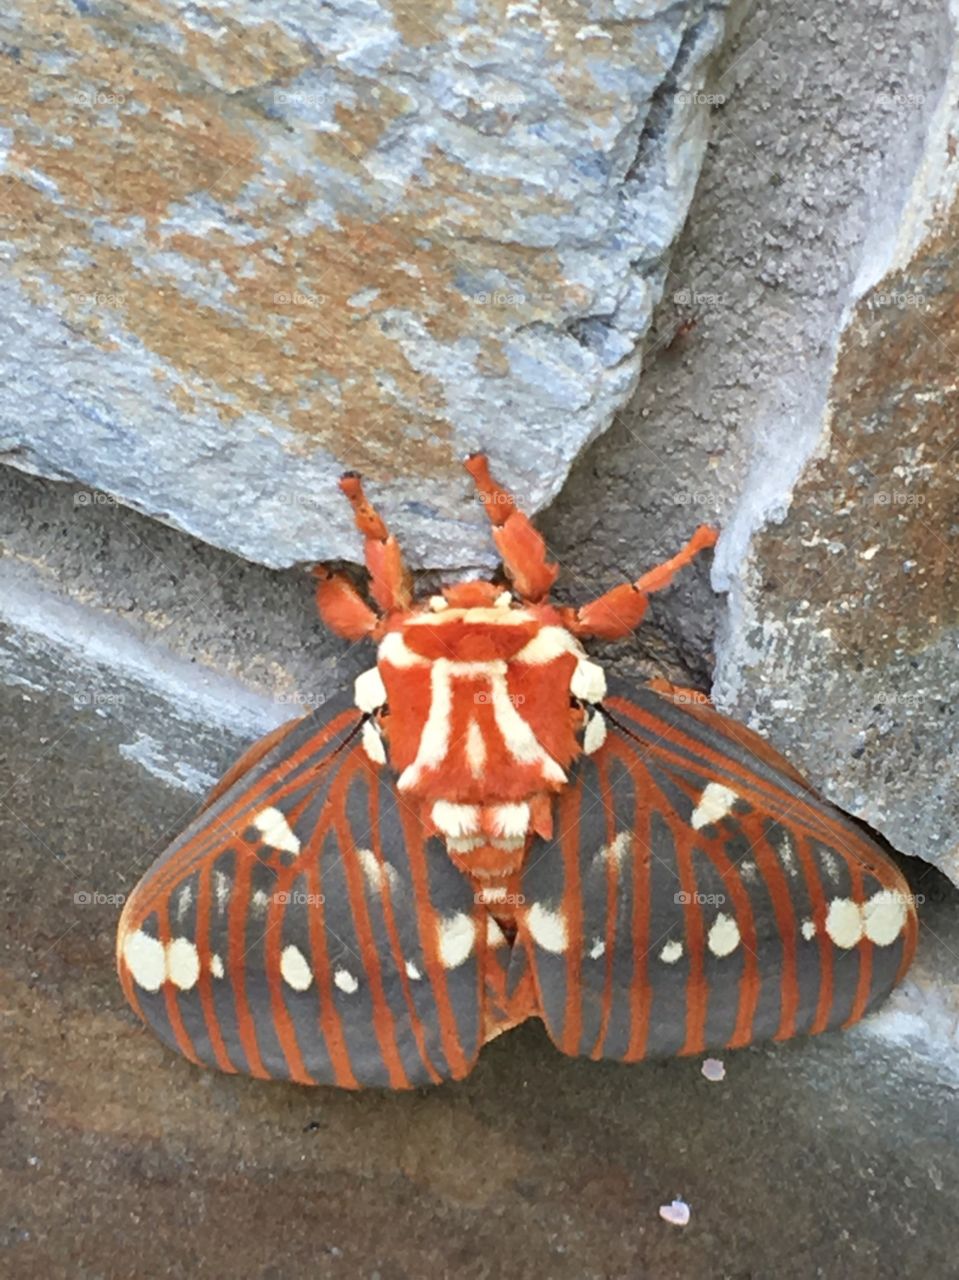 Breathtaking! This moth is so incredible. We saw so many different kinds of moths while on vacation at Lake Lure